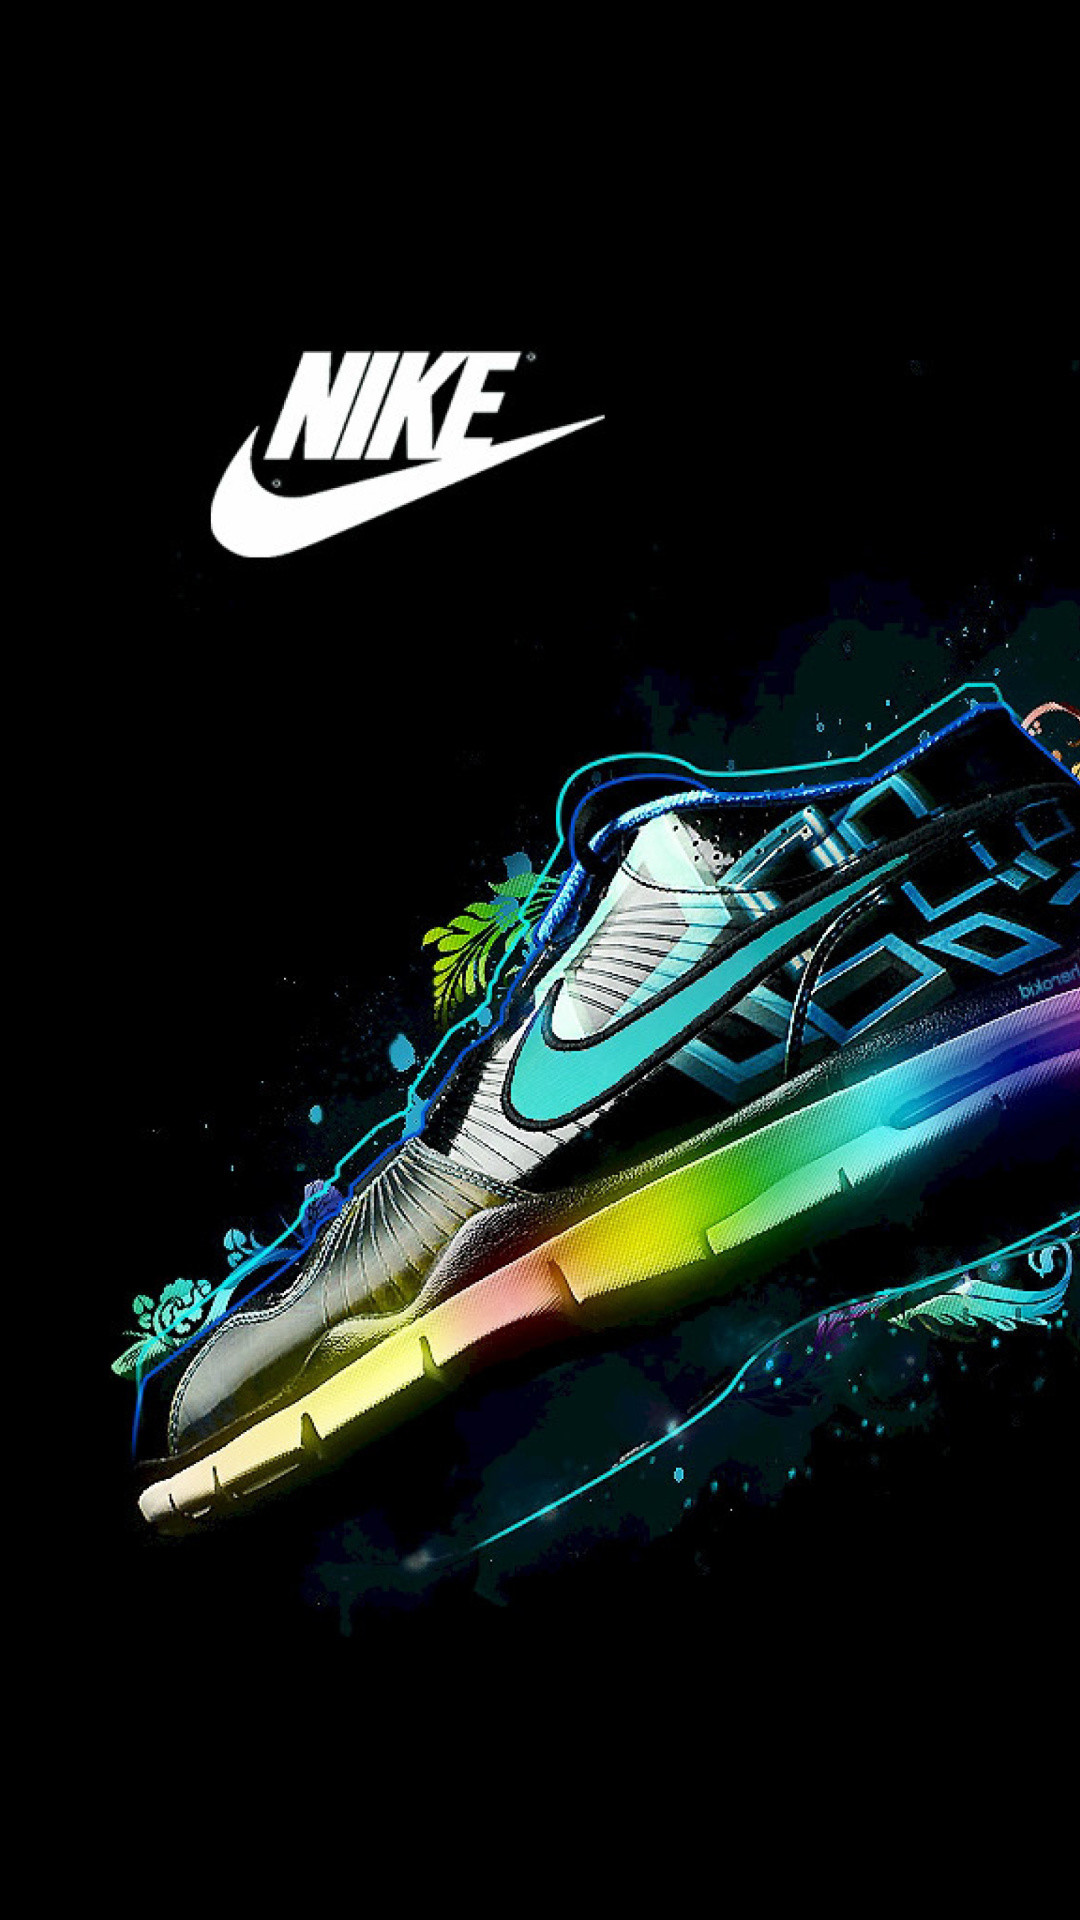 1080x1920 8. nike-wallpaper-for-iphone3-338x600